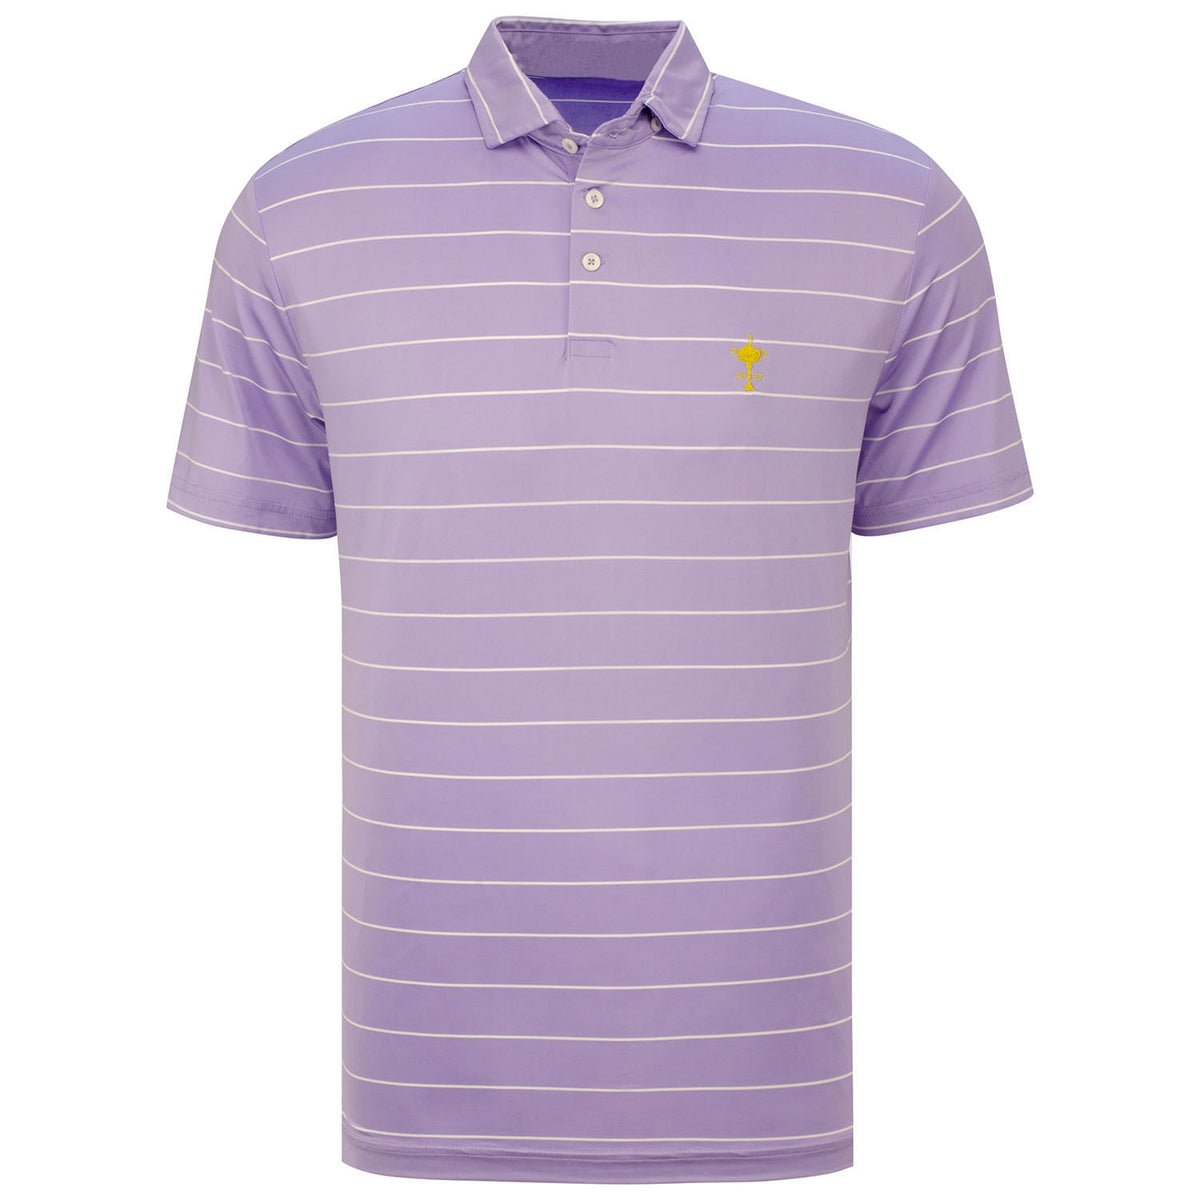 Ryder Cup Ralph Lauren Yarn Dye Featherweight Airflow Jersey Polo in Purple- Front View